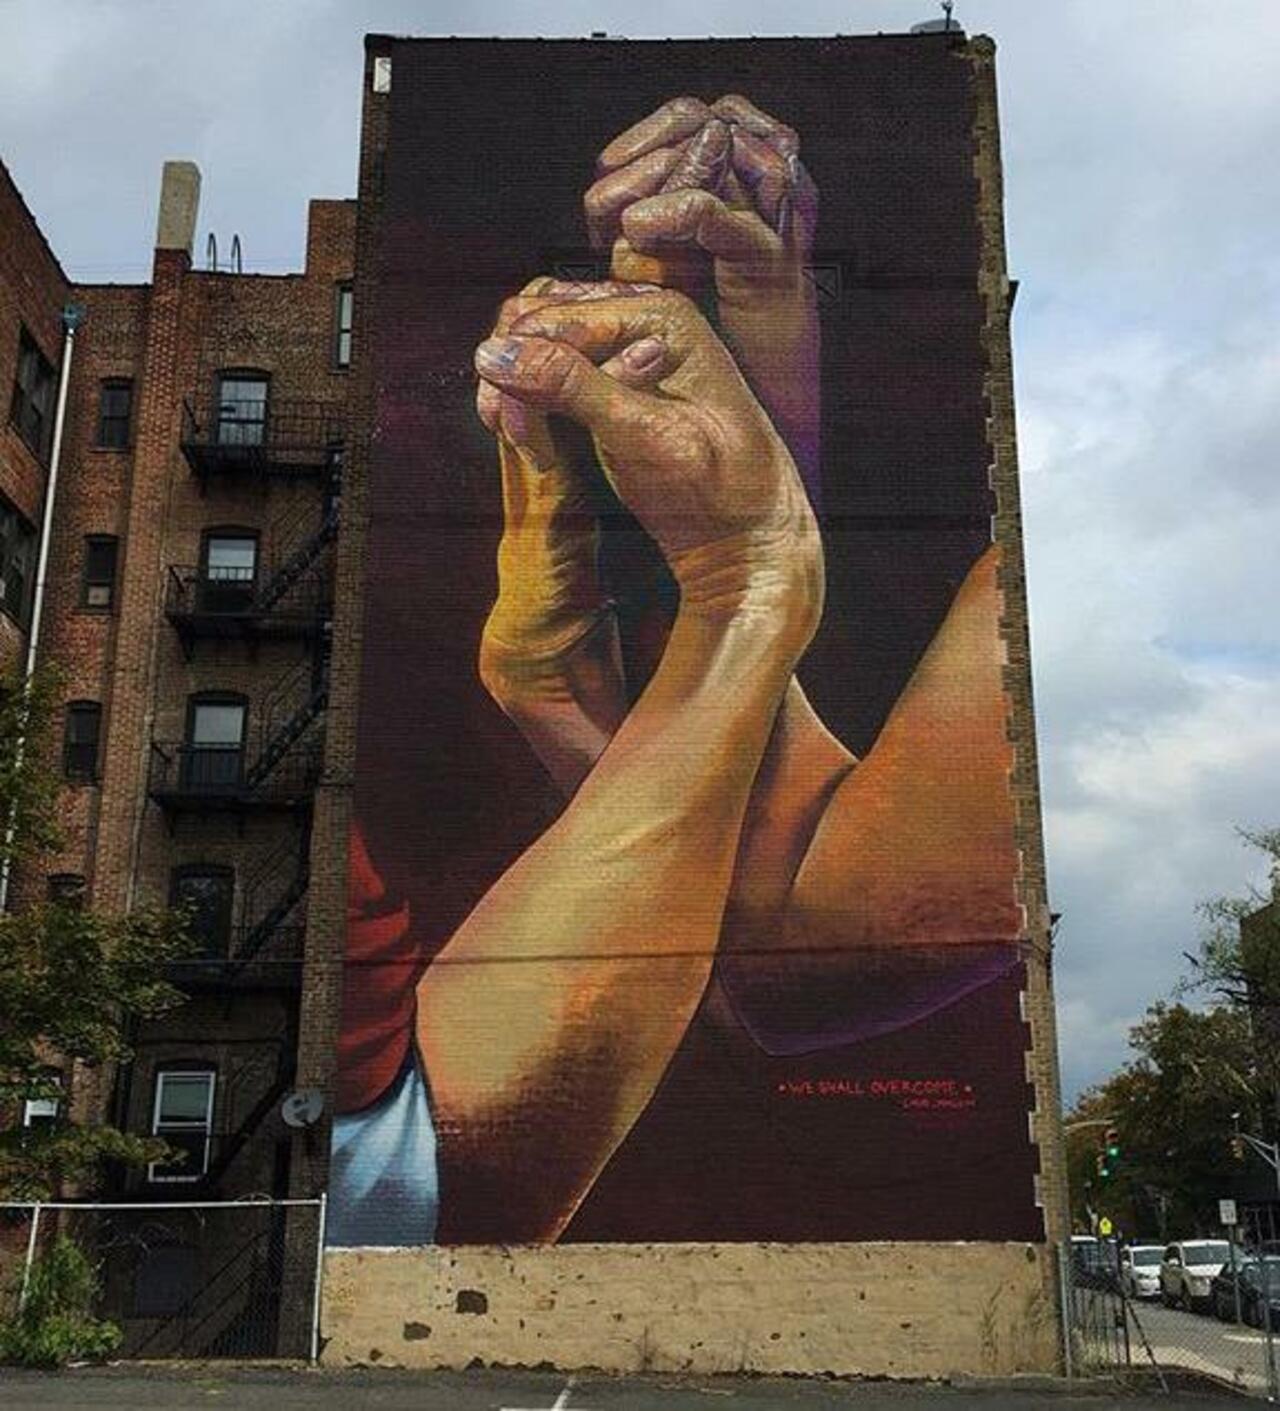 New Street Art by CaseMaclaim in Jersey City for the TheBKcollective 

#art #graffiti #mural #streetart http://t.co/F6uQCOT87Q